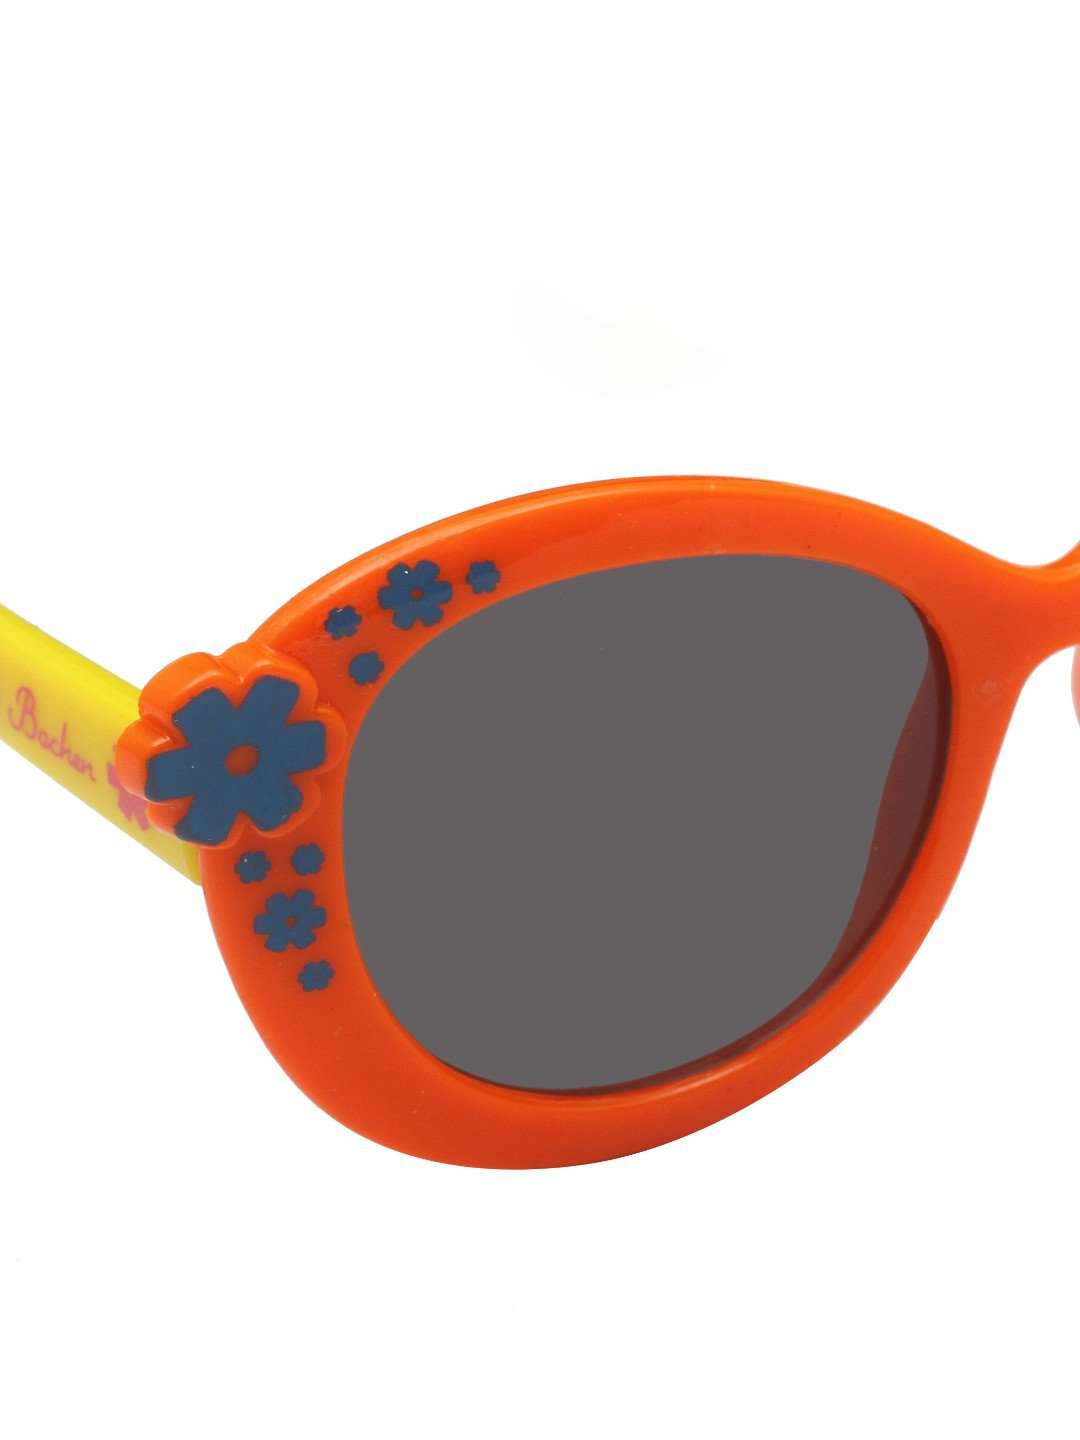 Stol'n Kids Orange and Yellow Flower Oval Sunglasses - SWHF